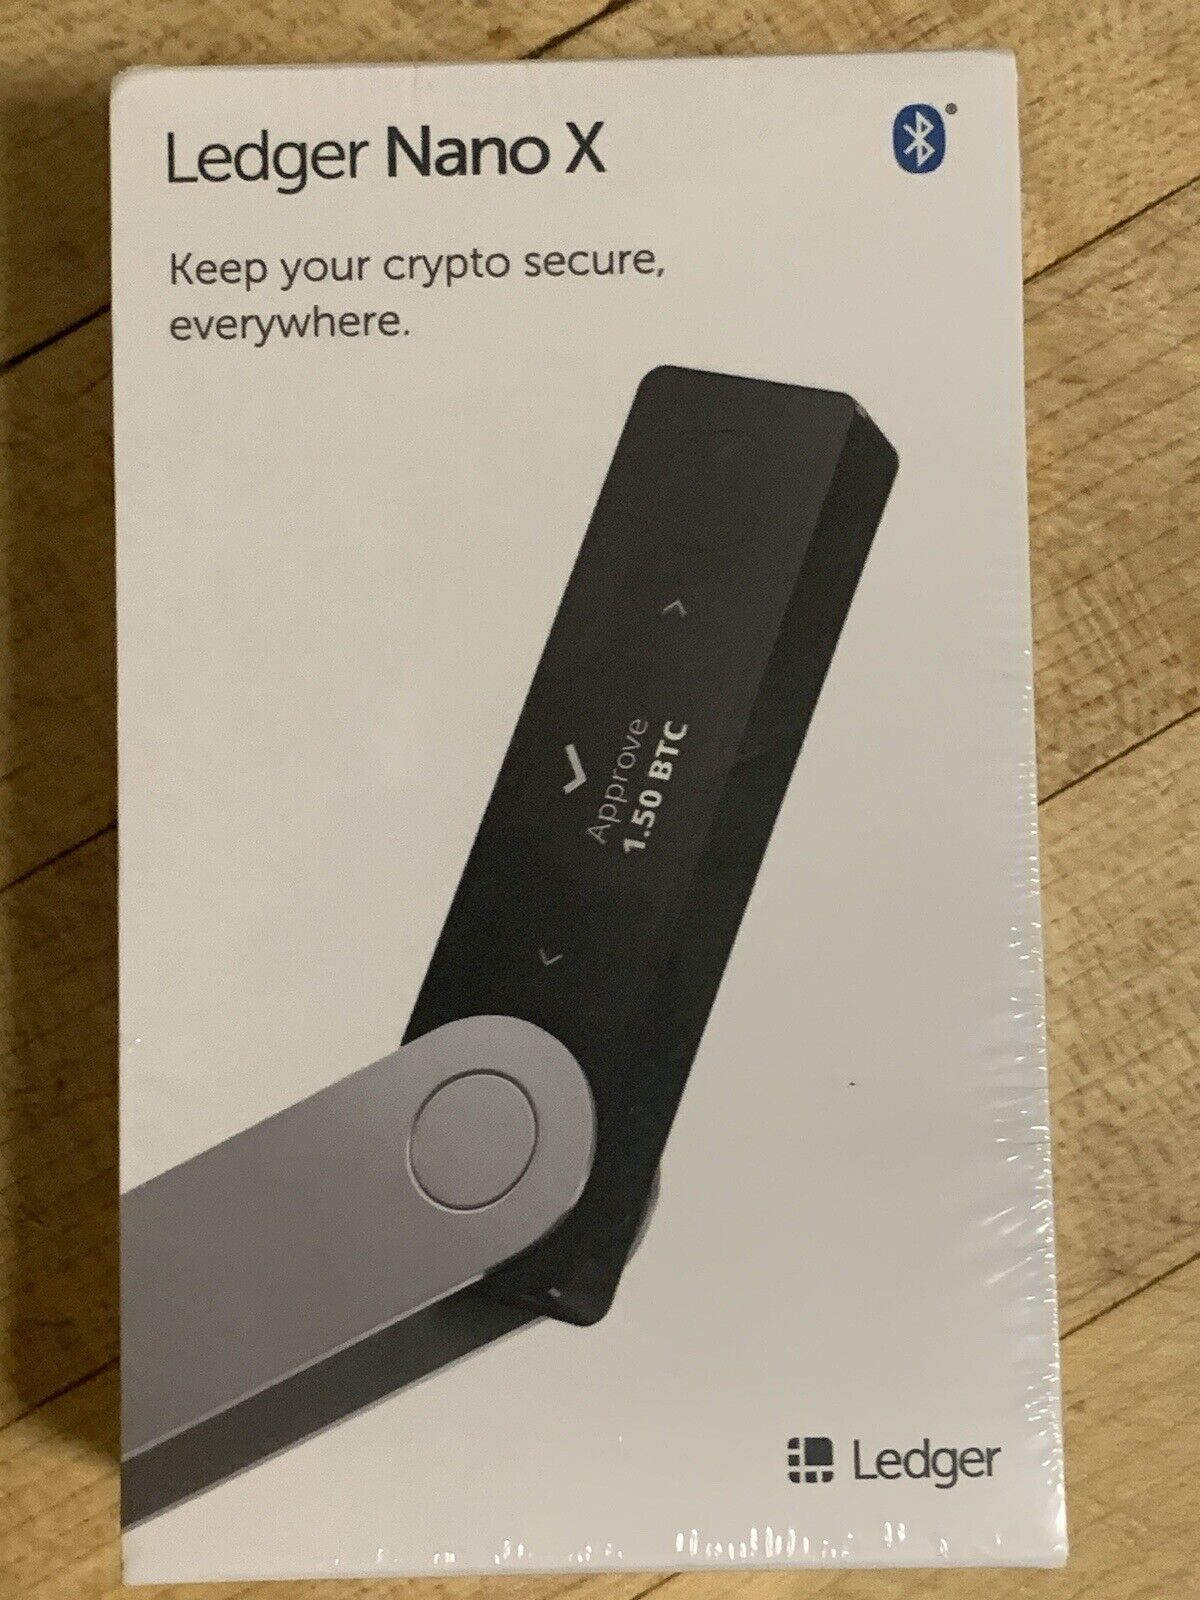 Ledger Nano X crypto wallet adds Bluetooth for mobile bitcoin access - The Verge